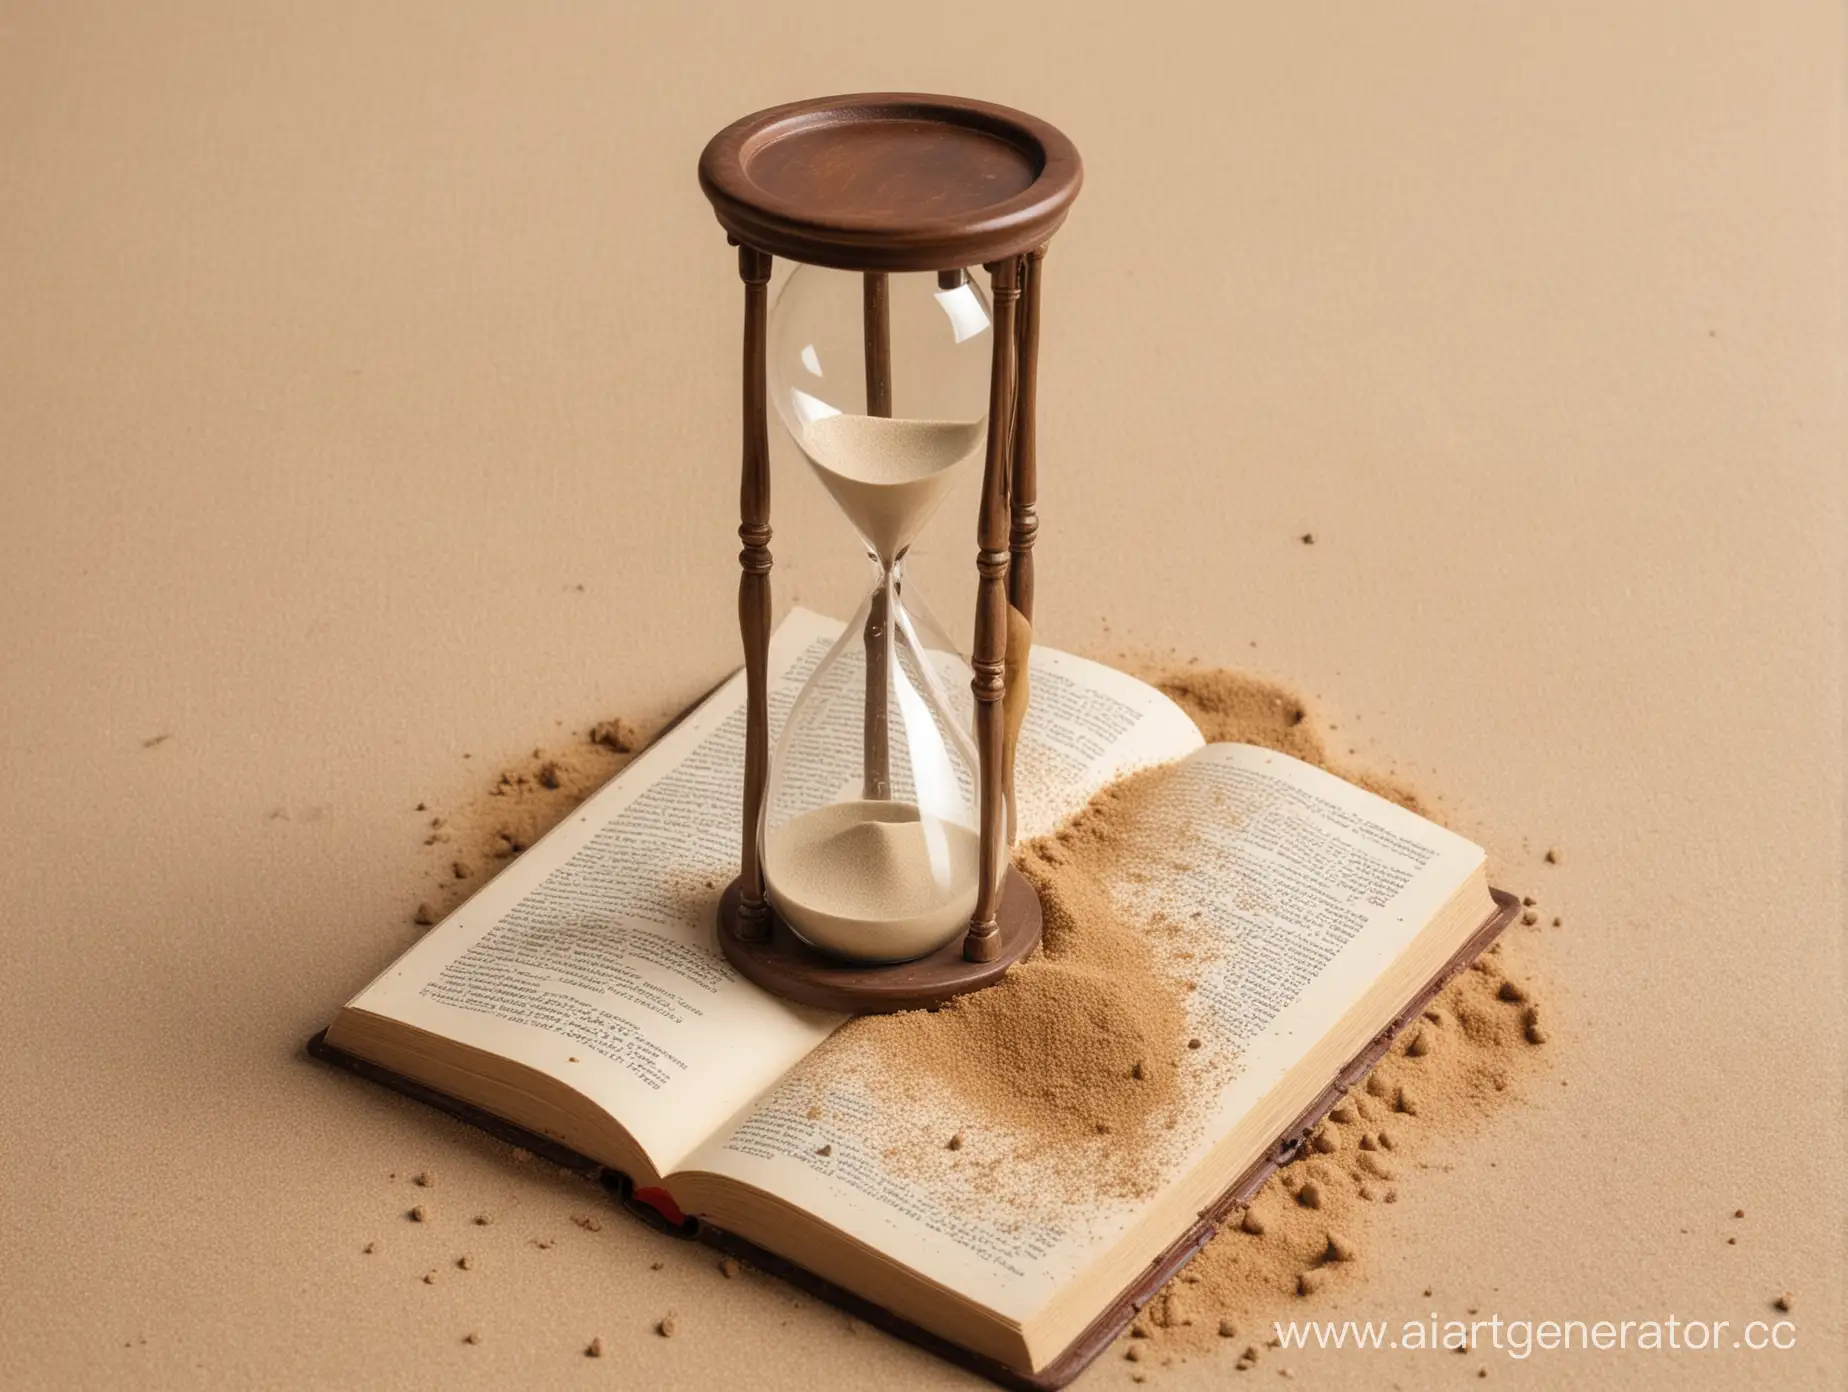 Hourglass-with-Broken-Base-Spilling-Sand-onto-Book